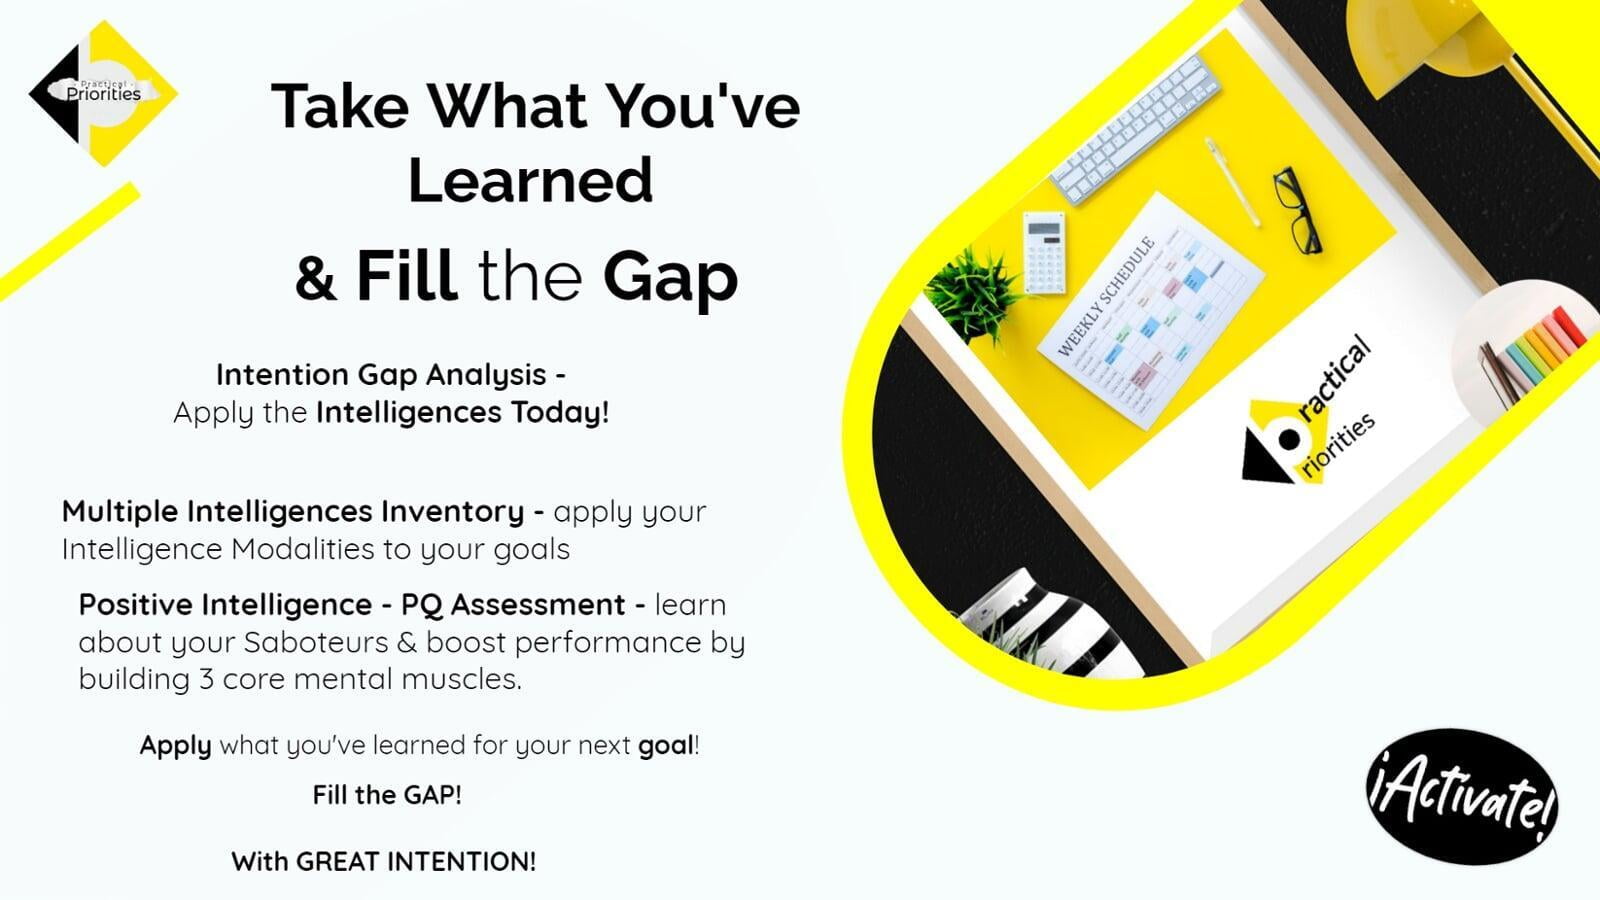 Calendar, glasses - Intention Gap Analysis - Take what you learned, fill the gap.